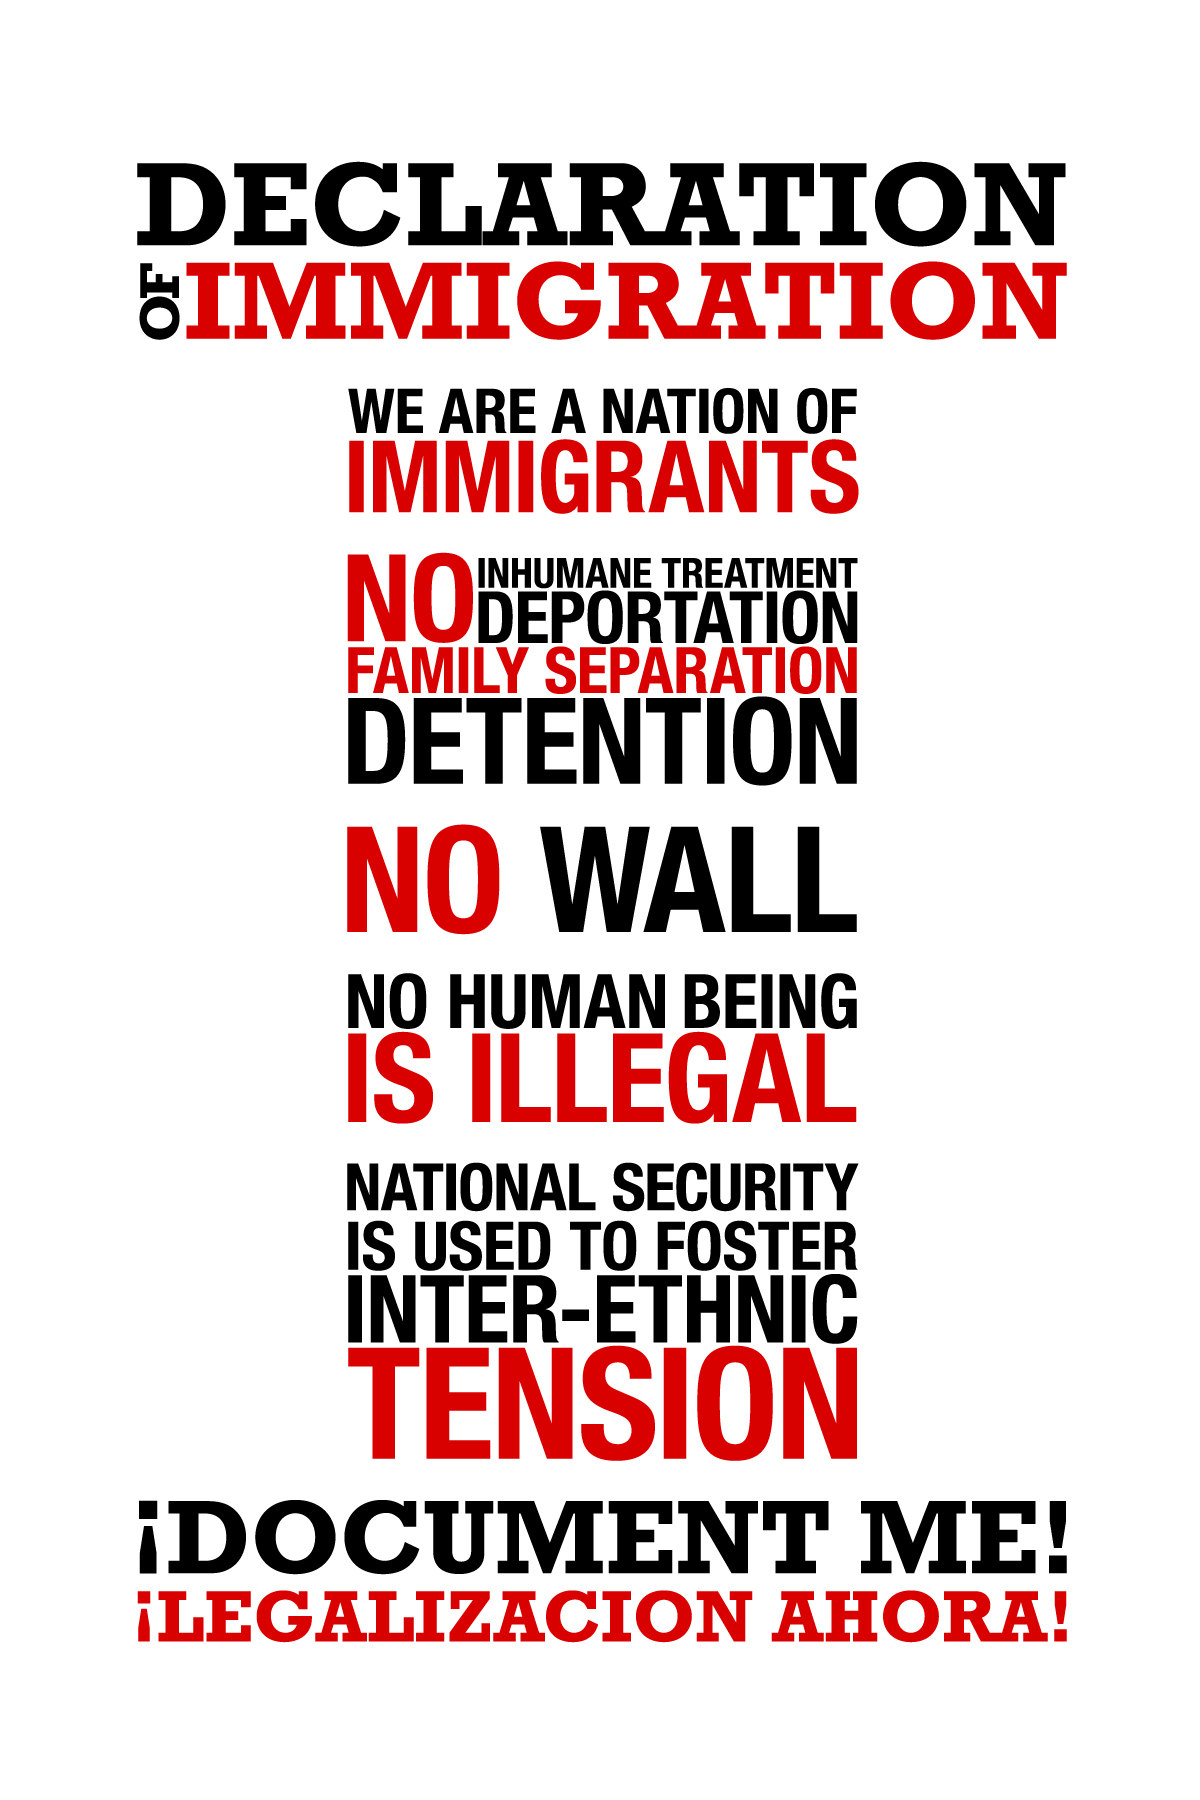 The Declaration of Immigration Sticker